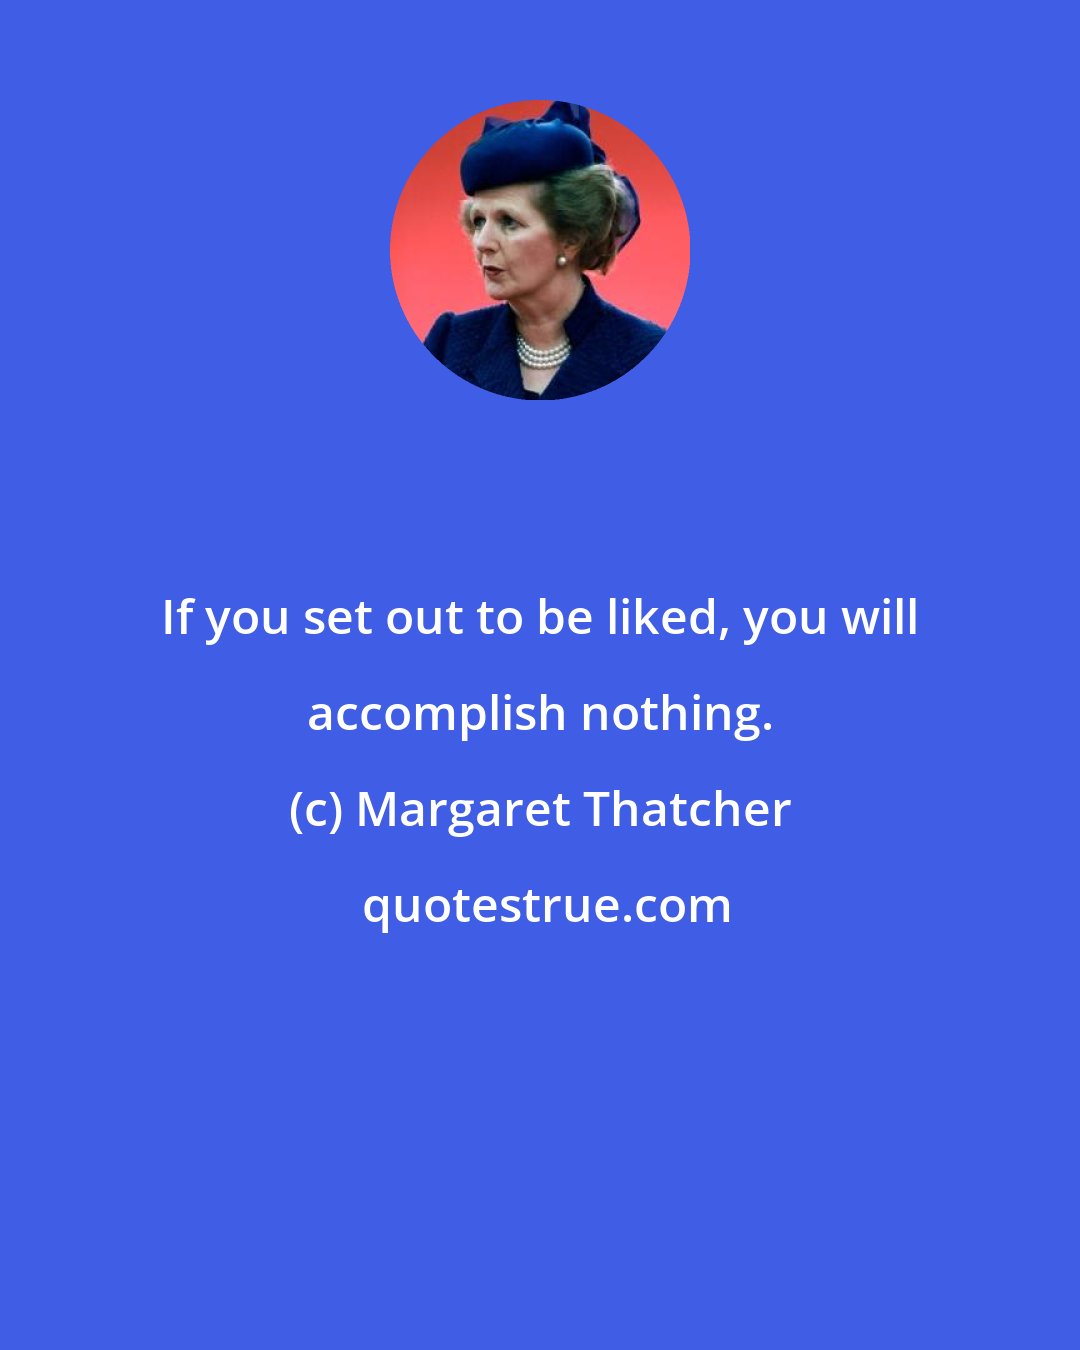 Margaret Thatcher: If you set out to be liked, you will accomplish nothing.